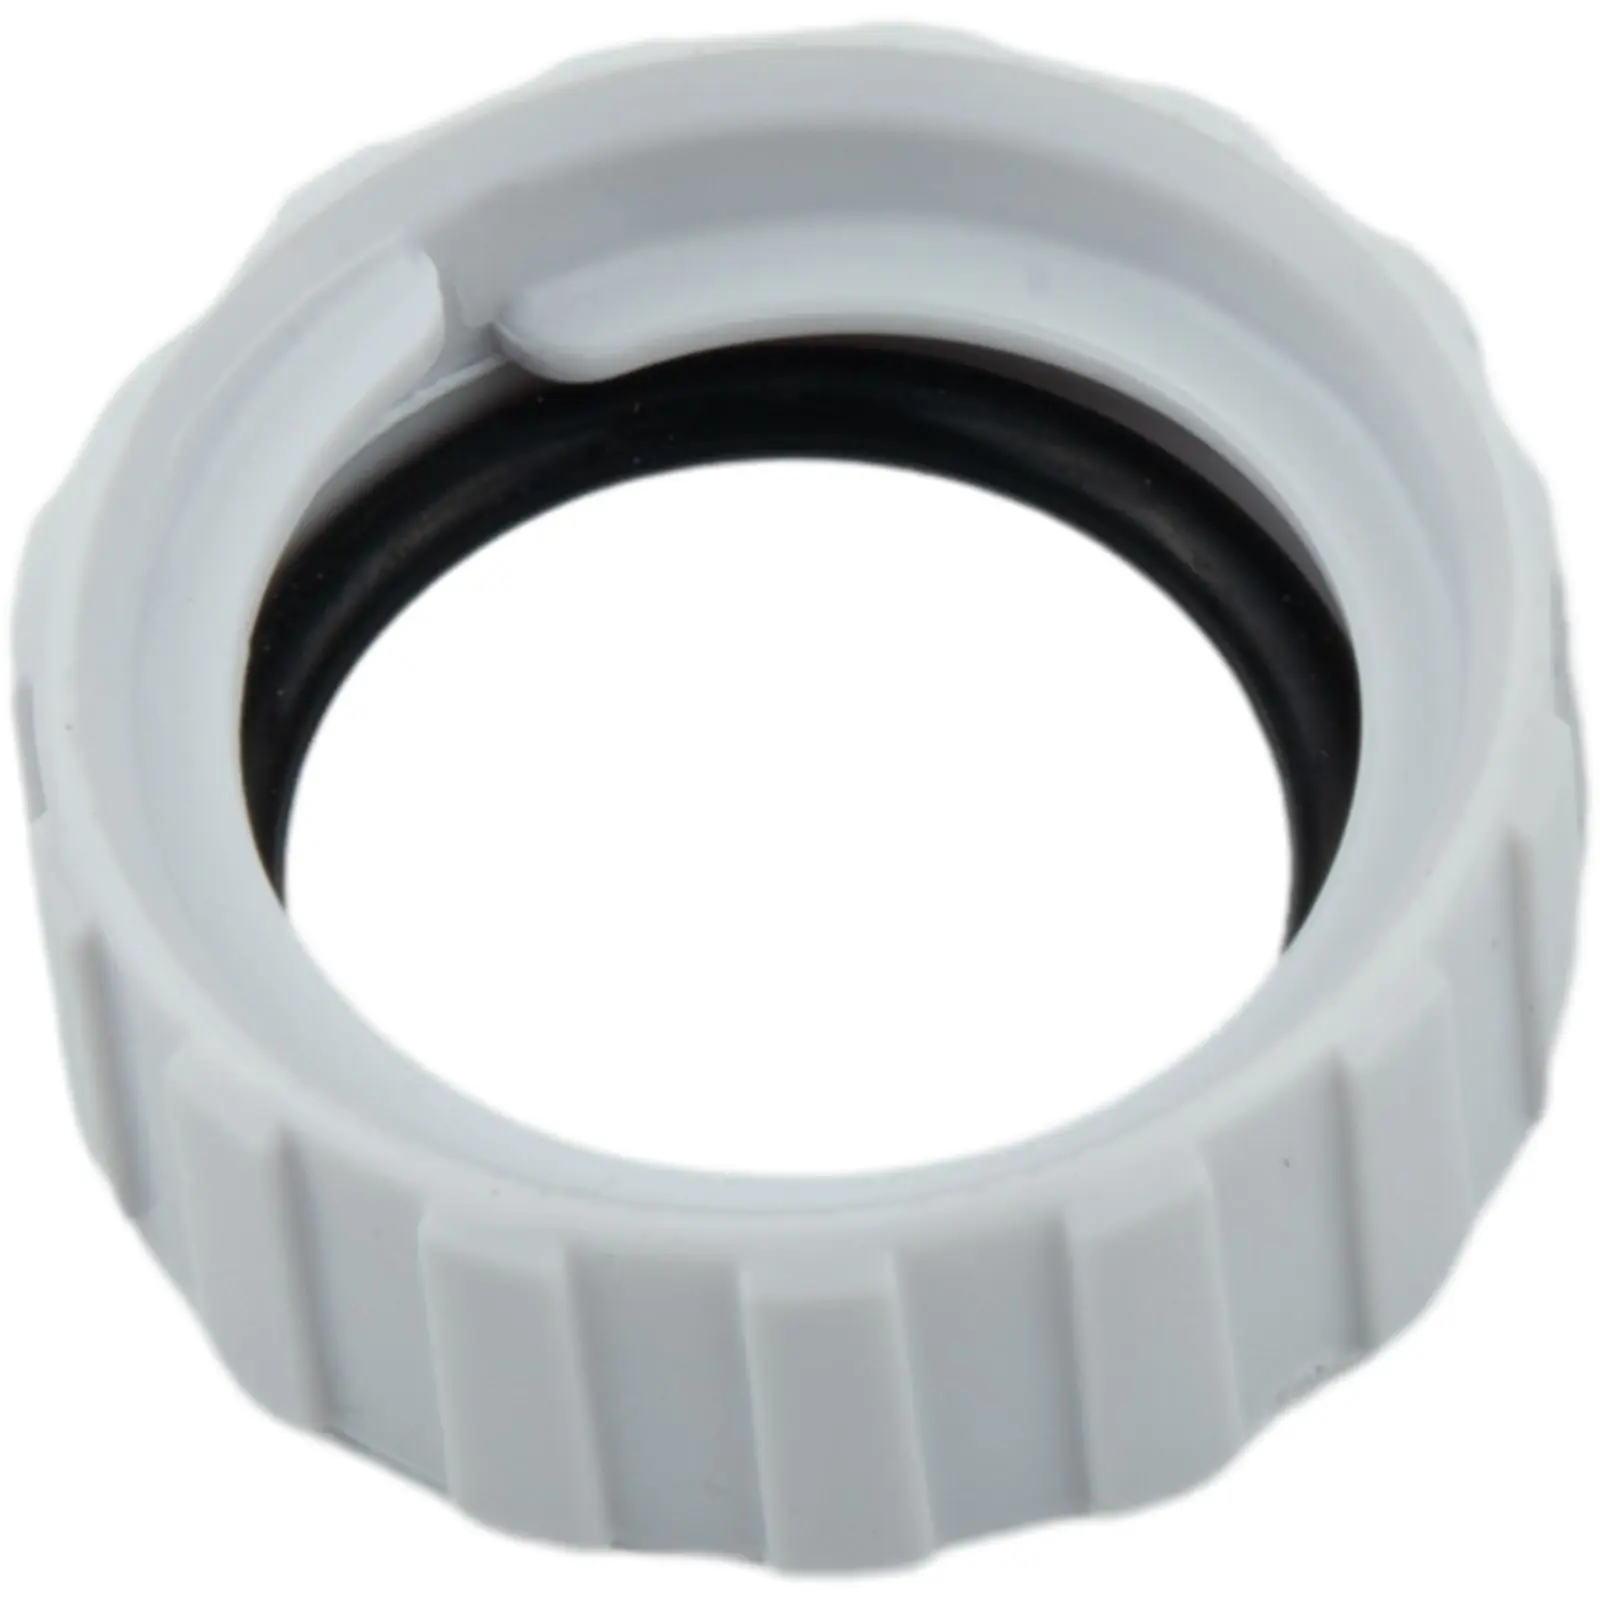 

2Pcs Hose Nut 1pc Hose Swivel 9-100-3002 9-100-3109 Connects Quickly Easy To Use For Polaris 360 Pool Cleaning Tools